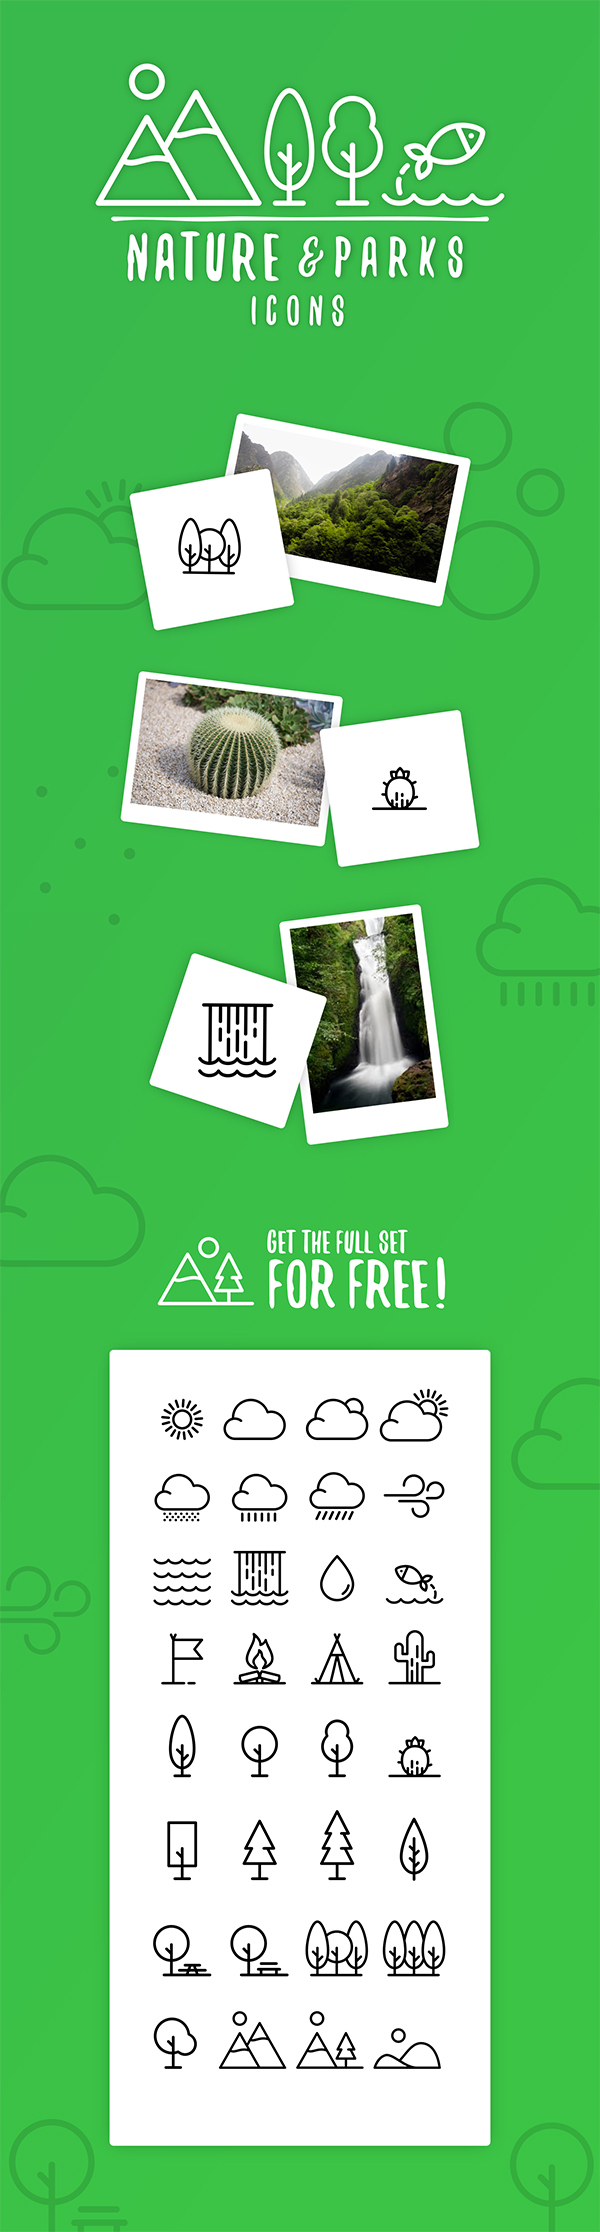 Nature & Parks FREE Icons